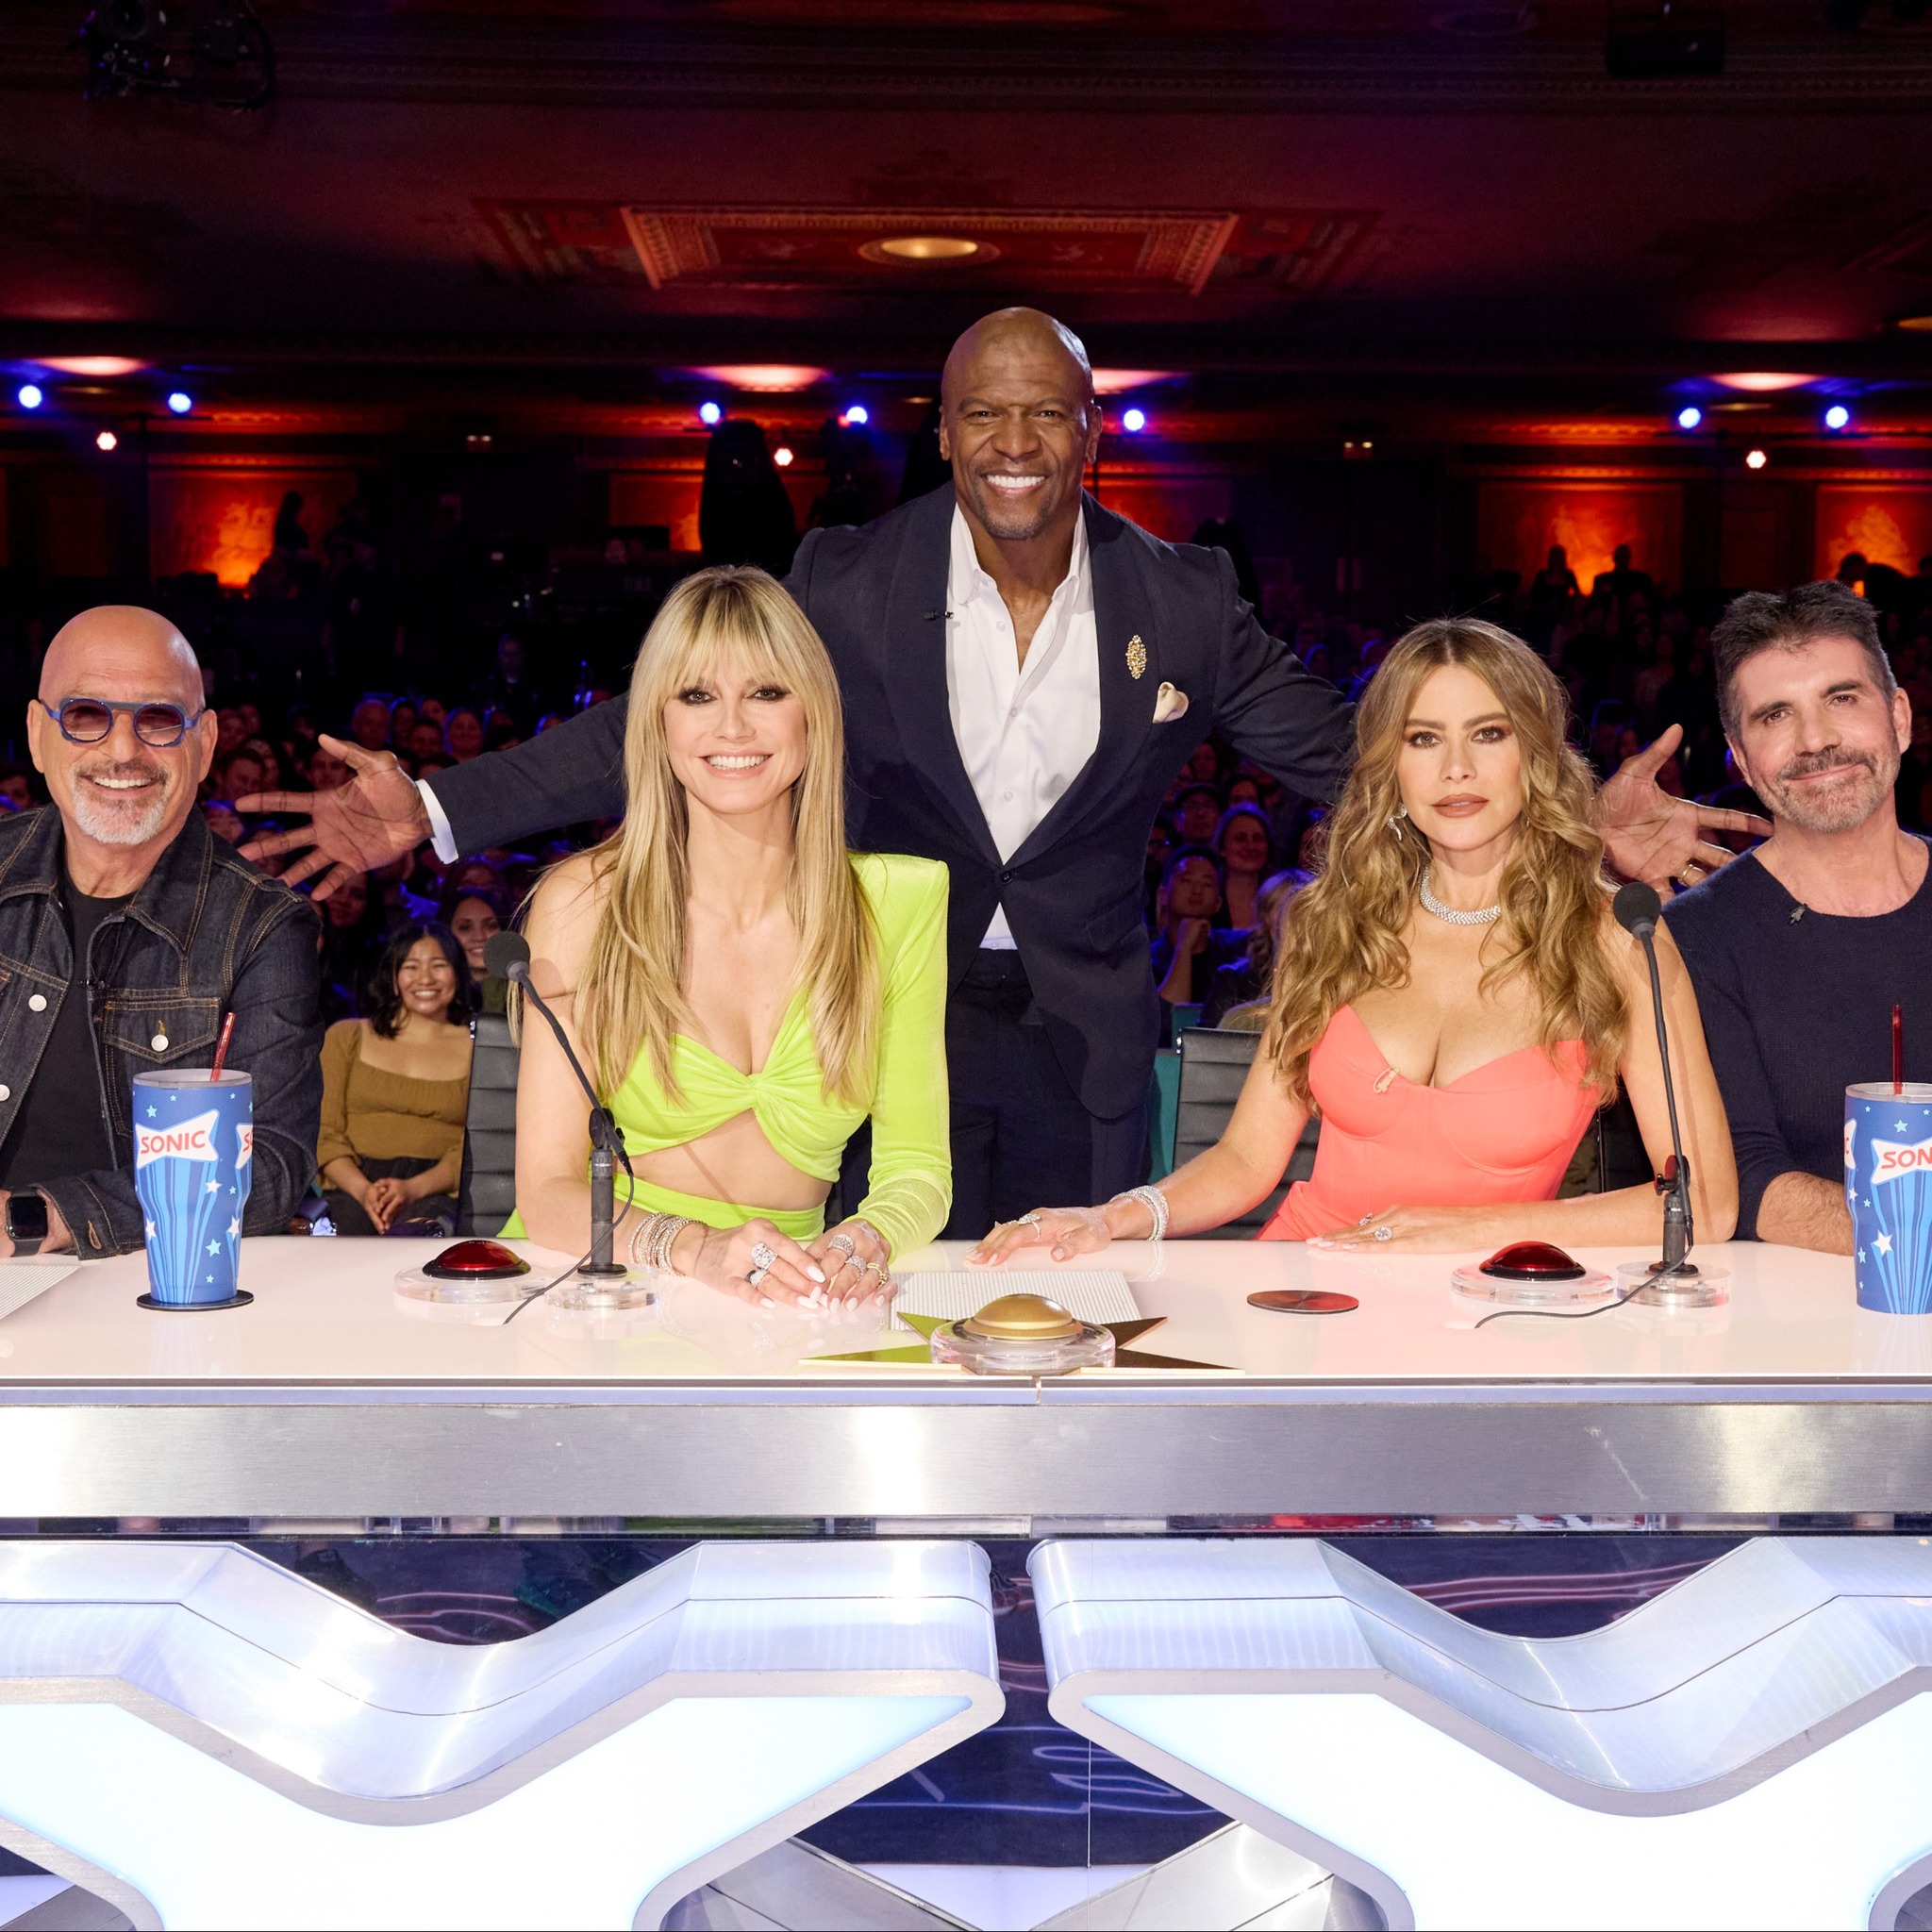 Howie, Heidi, Terry, Sofia, and Simon pose together during a taping of AGT: Season 18 (Photo property of NBC)